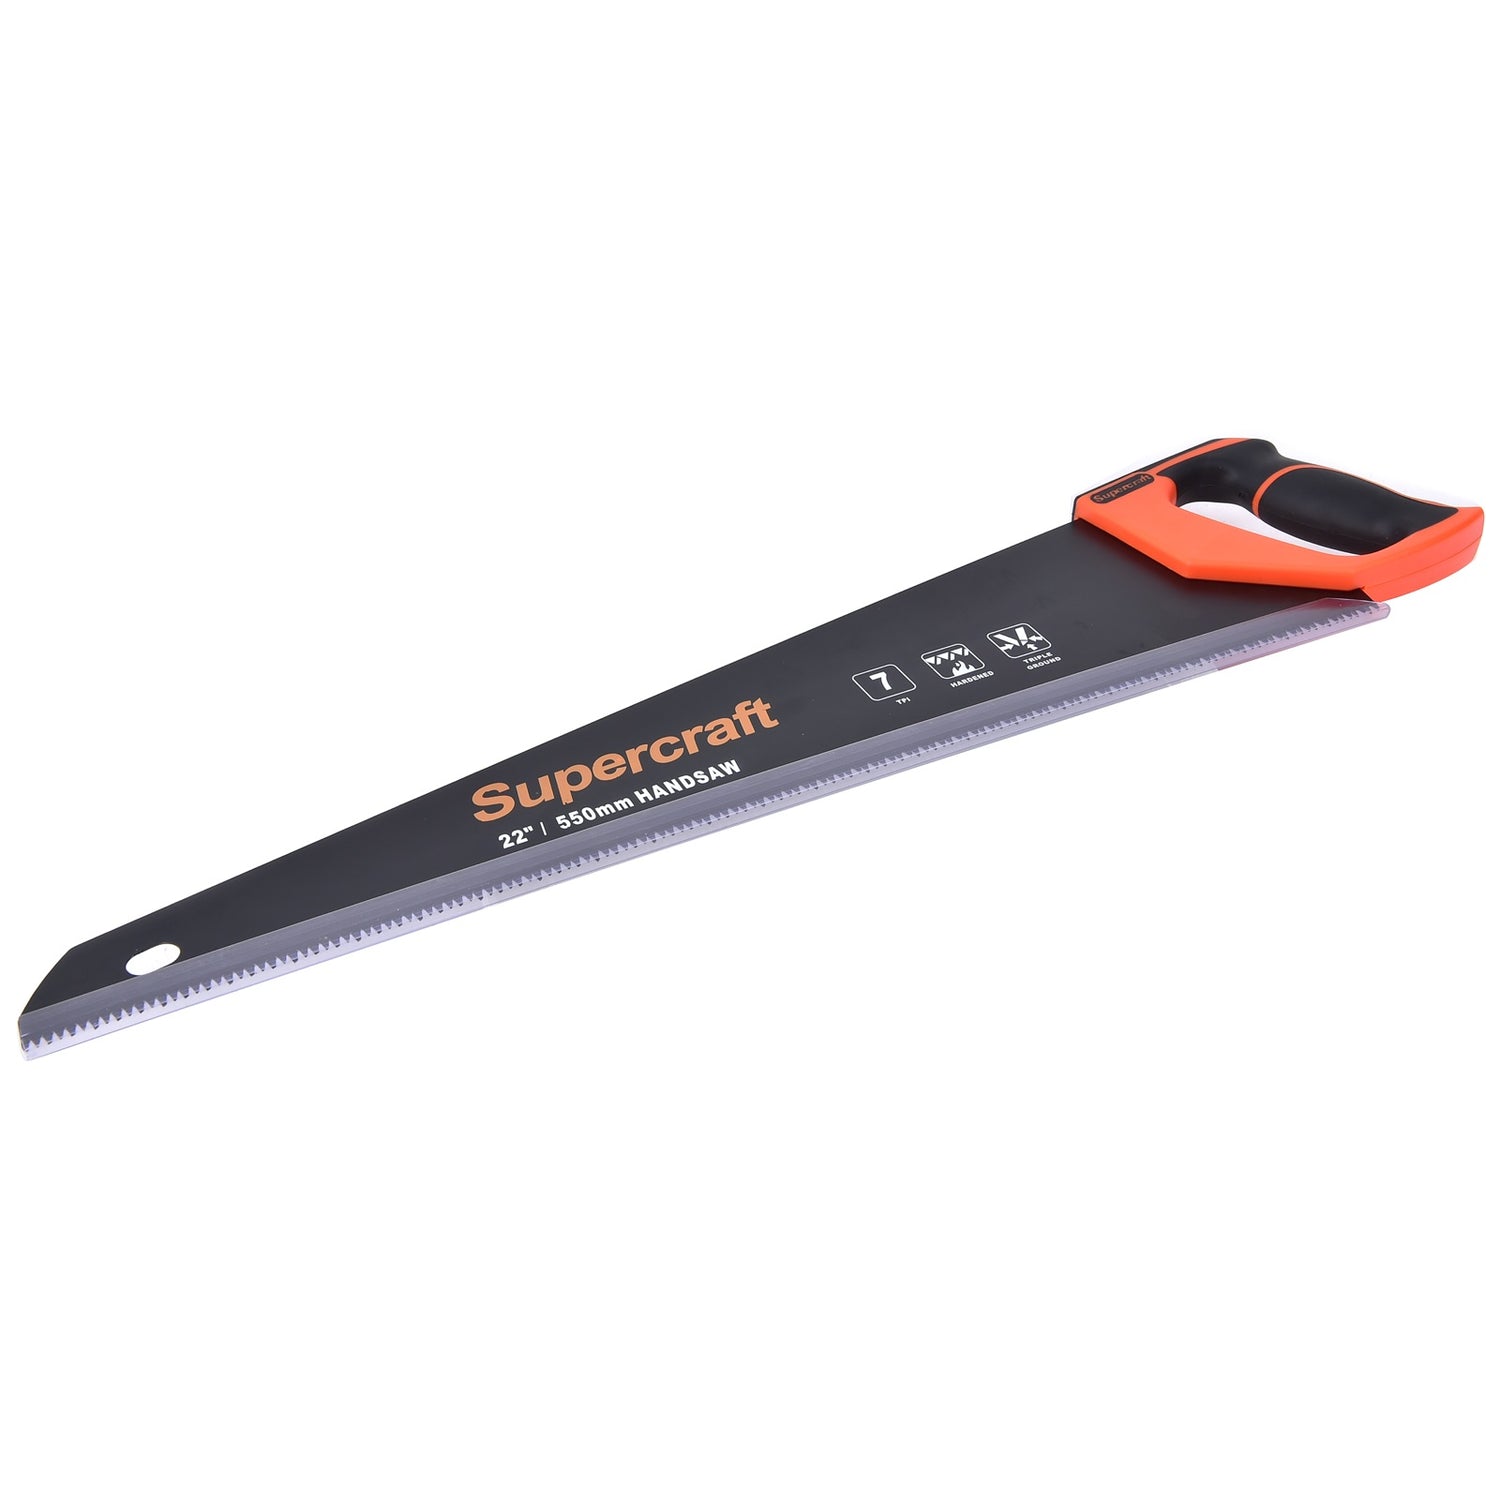 Supercraft Handsaw Double Cut 550mm/22in